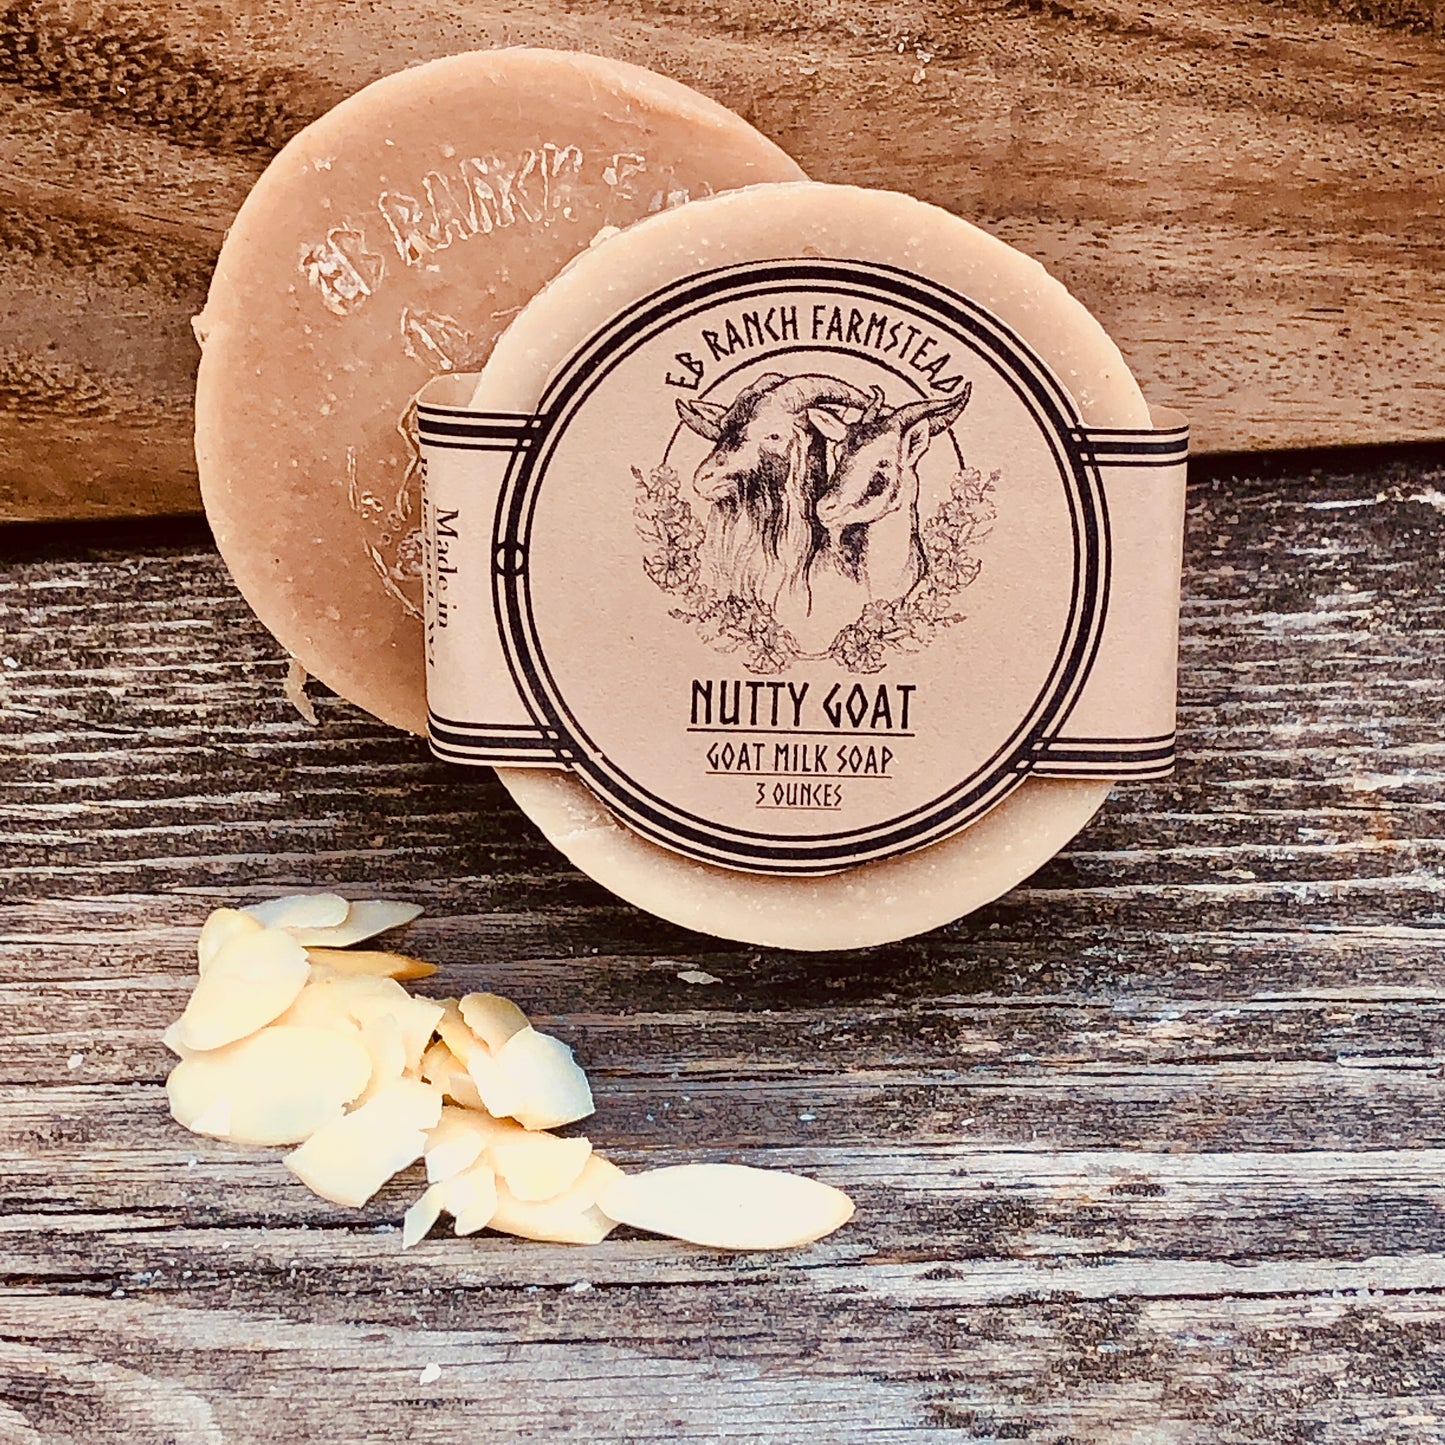 Bar of Wild Haven Farm's Nutty Goat goat milk soap made with San Clemente Island goat milk